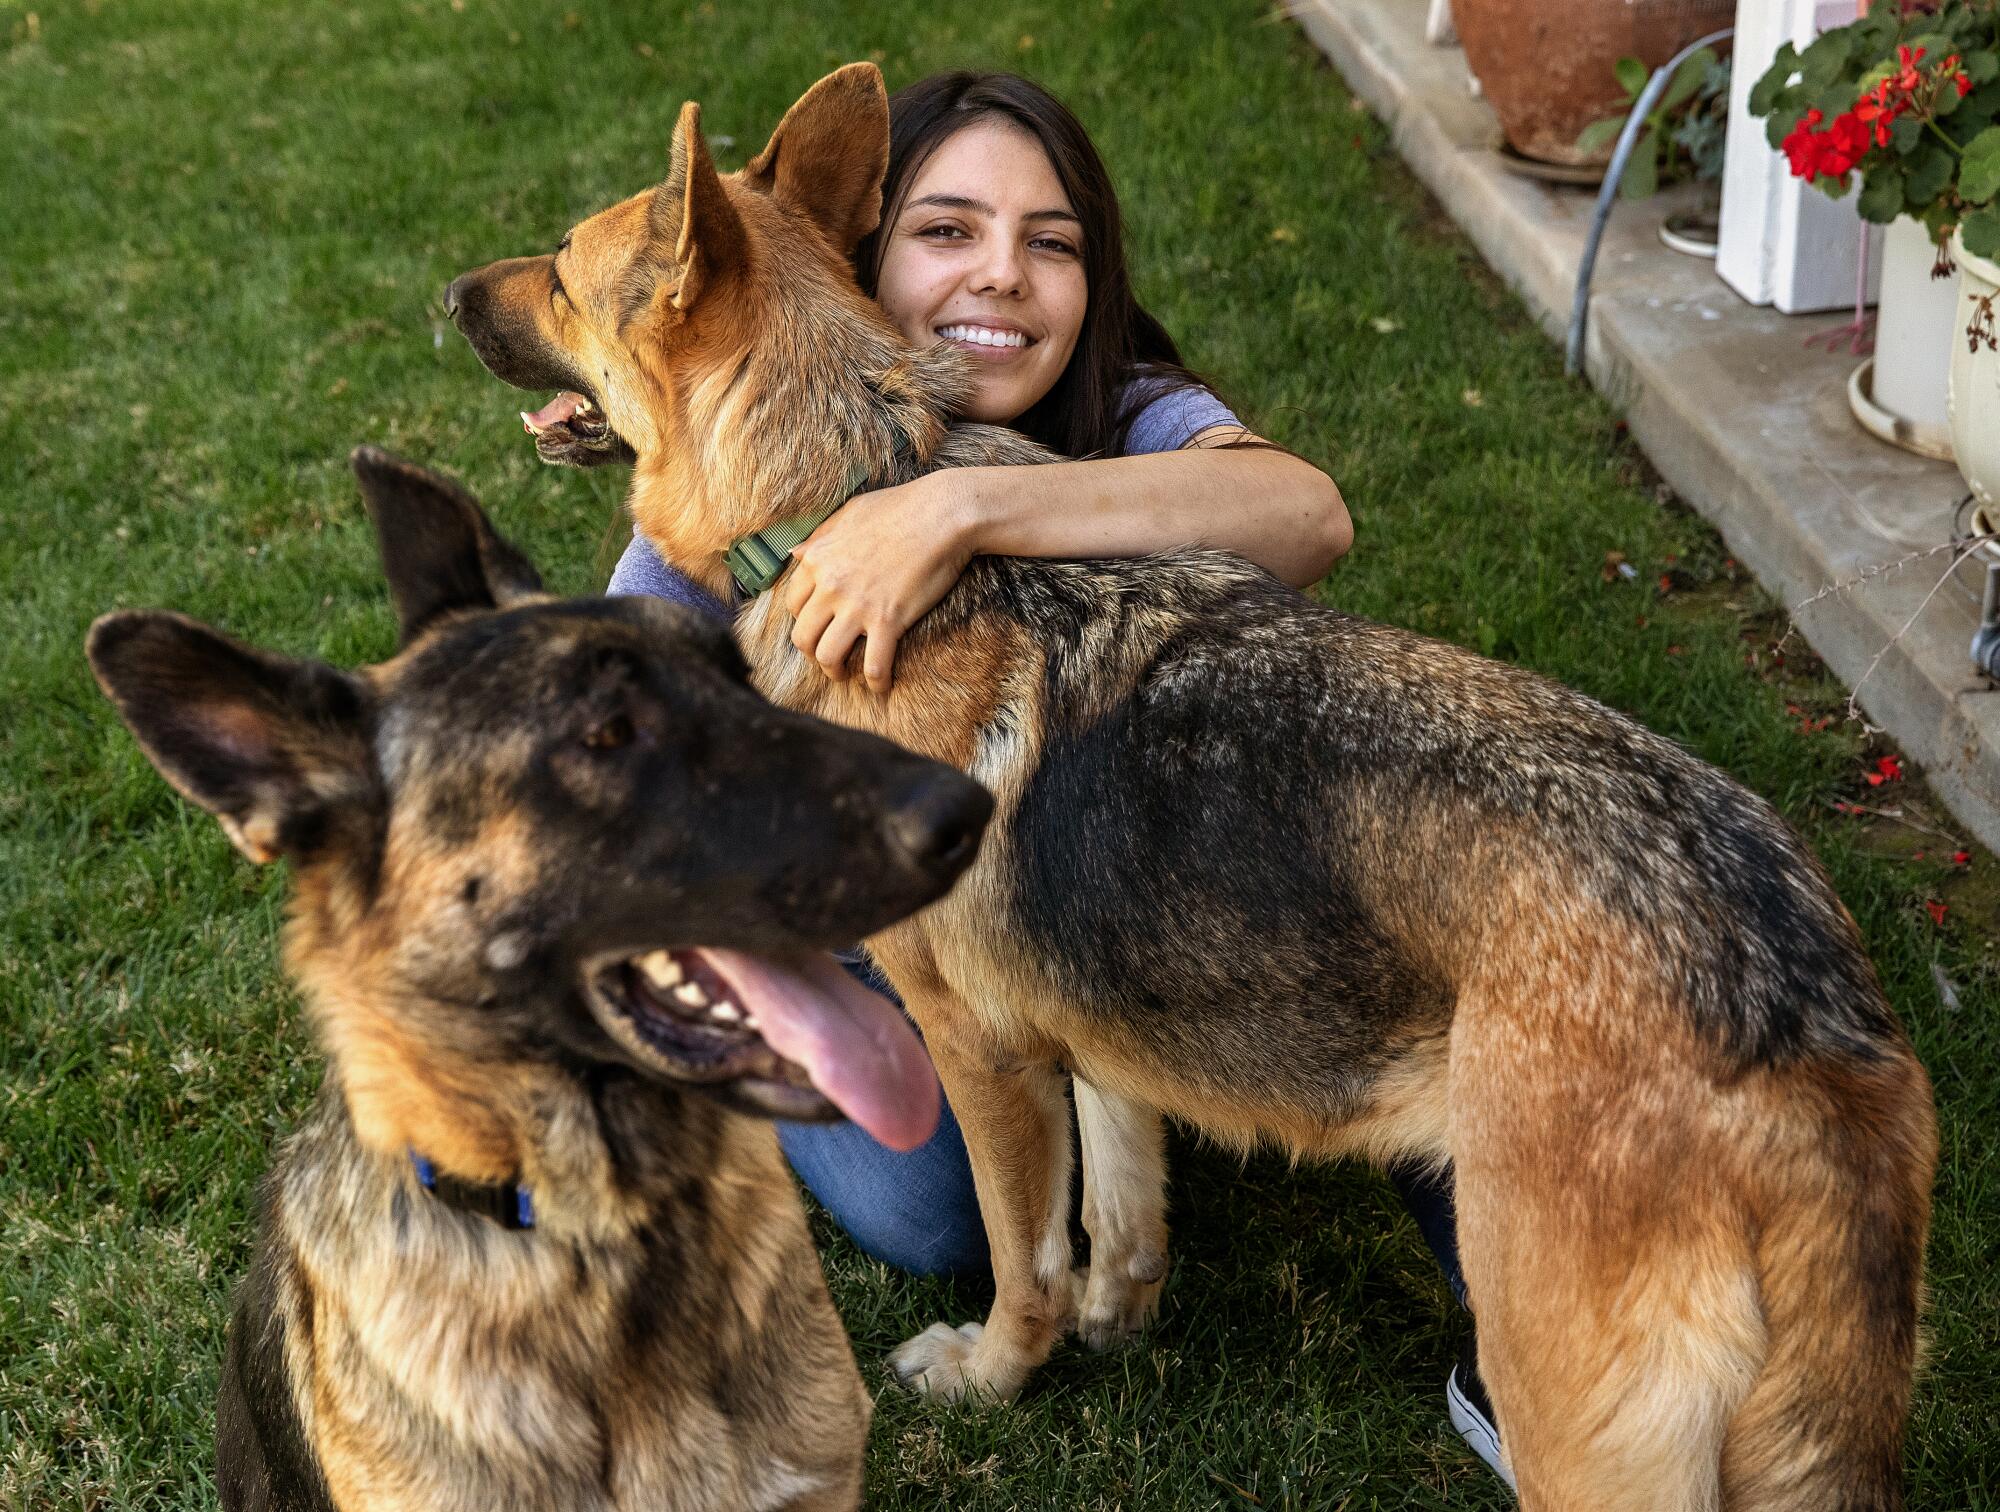 A woman kneeling on a lawn with her arm around one German shepherd as another sits nearby